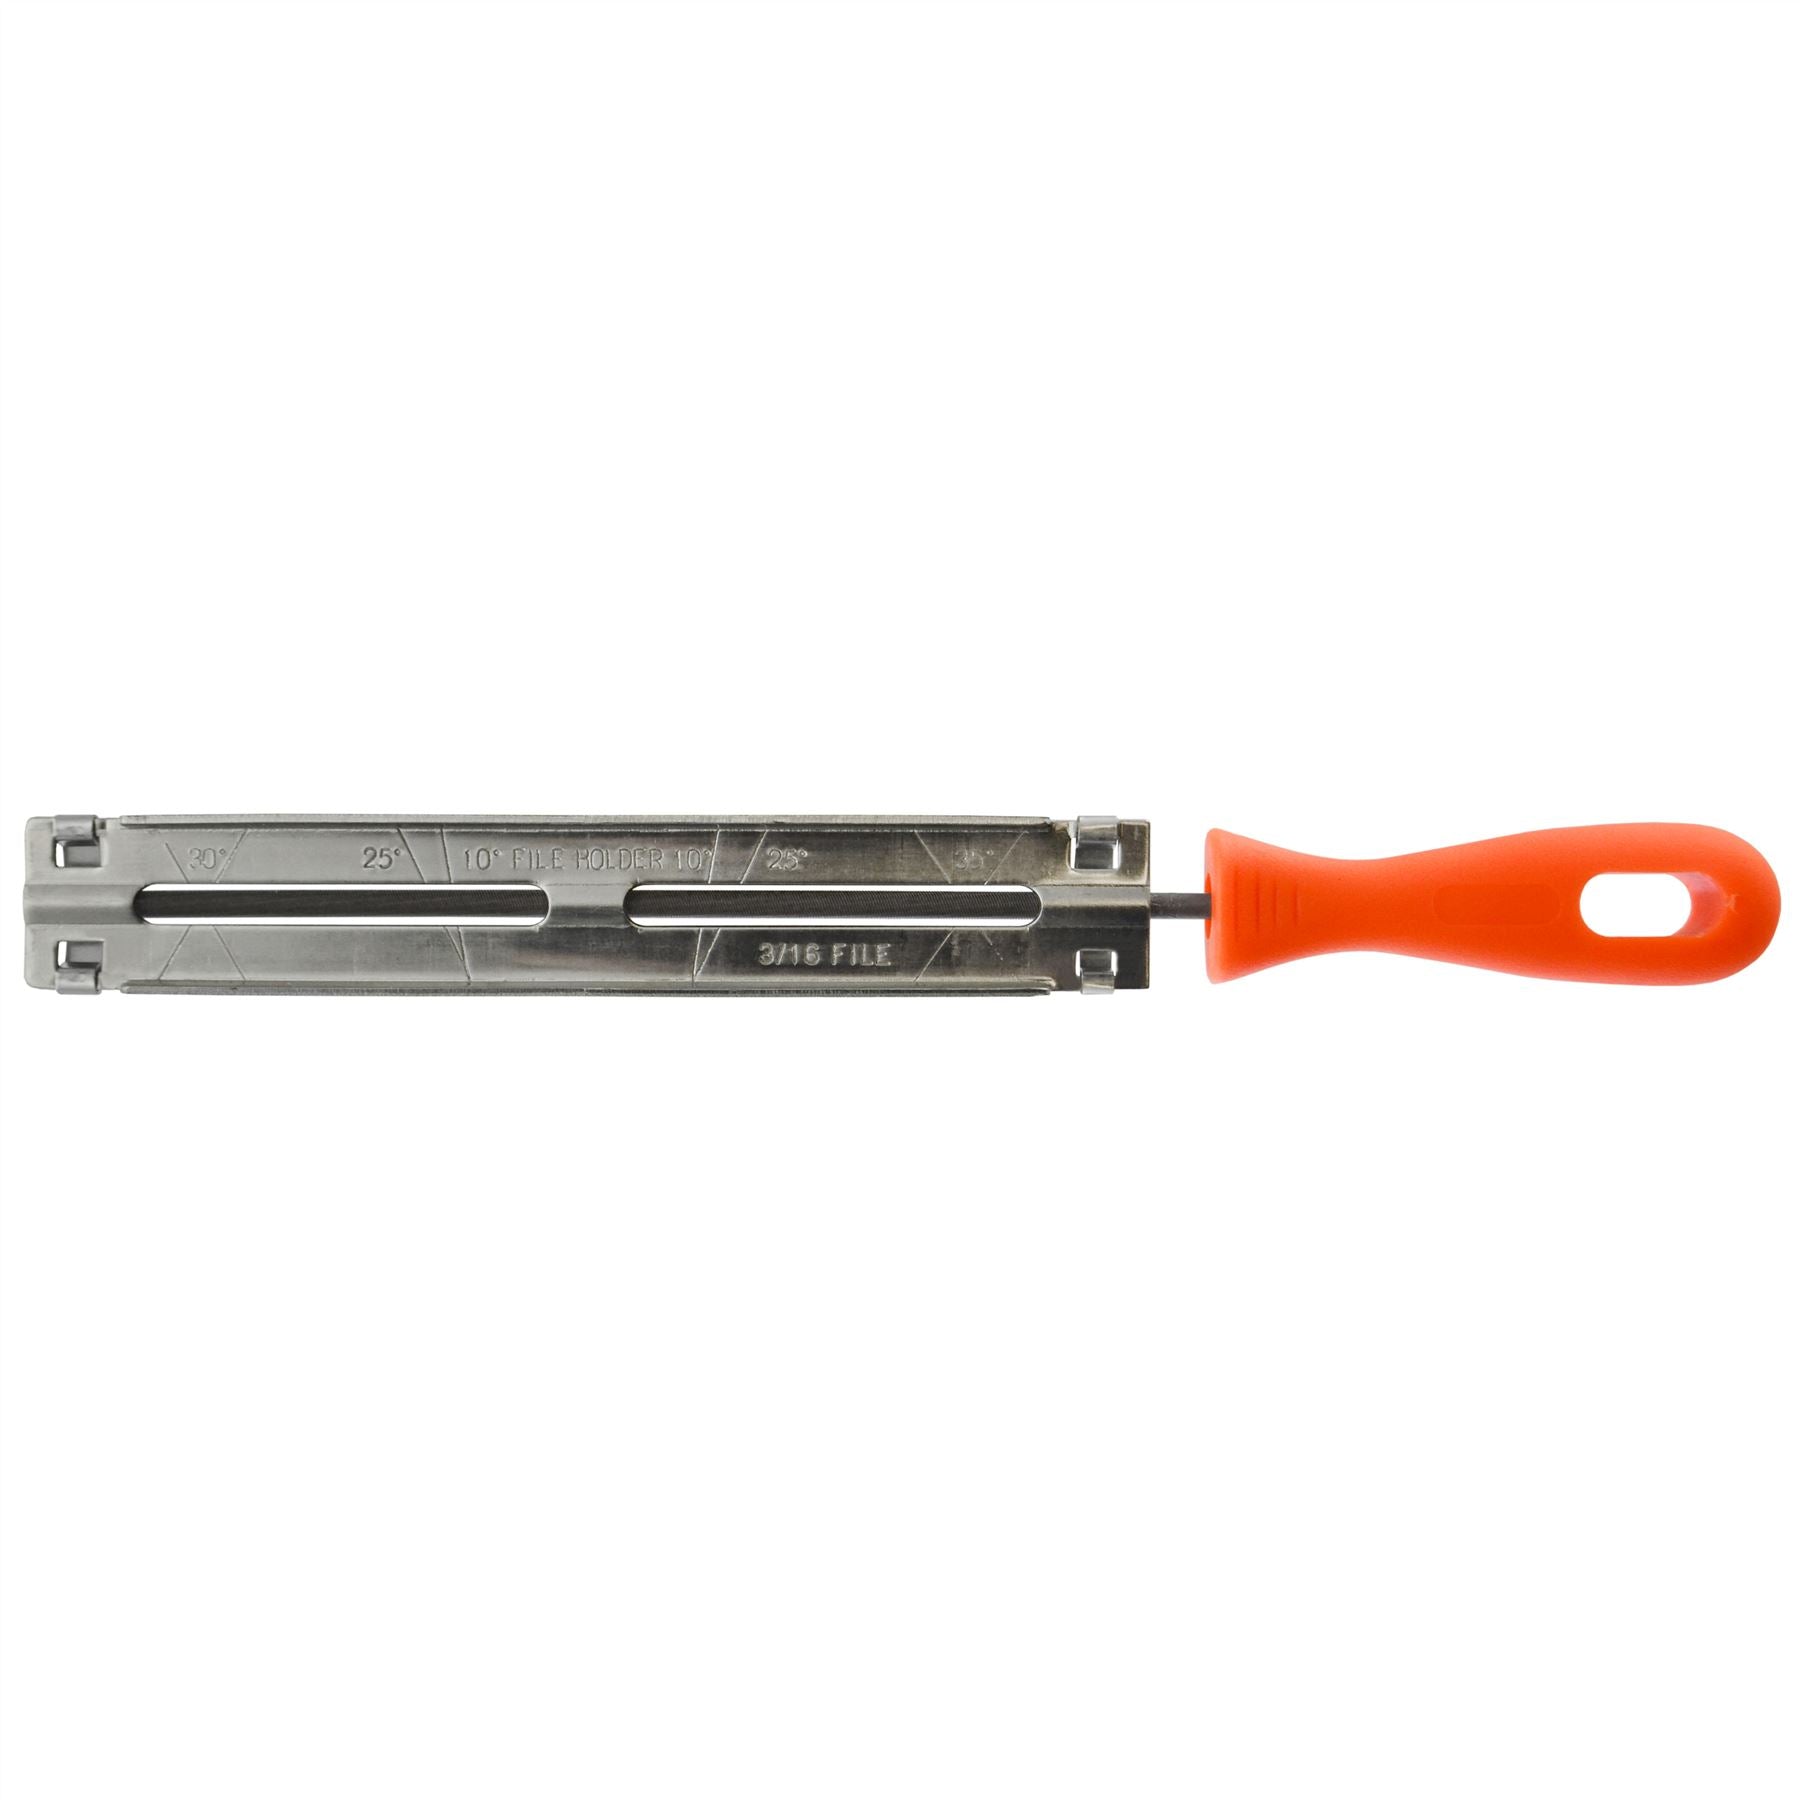 Chainsaw Chain File 4.8mm Sharpening Tool with Guide Sharpener Sil197